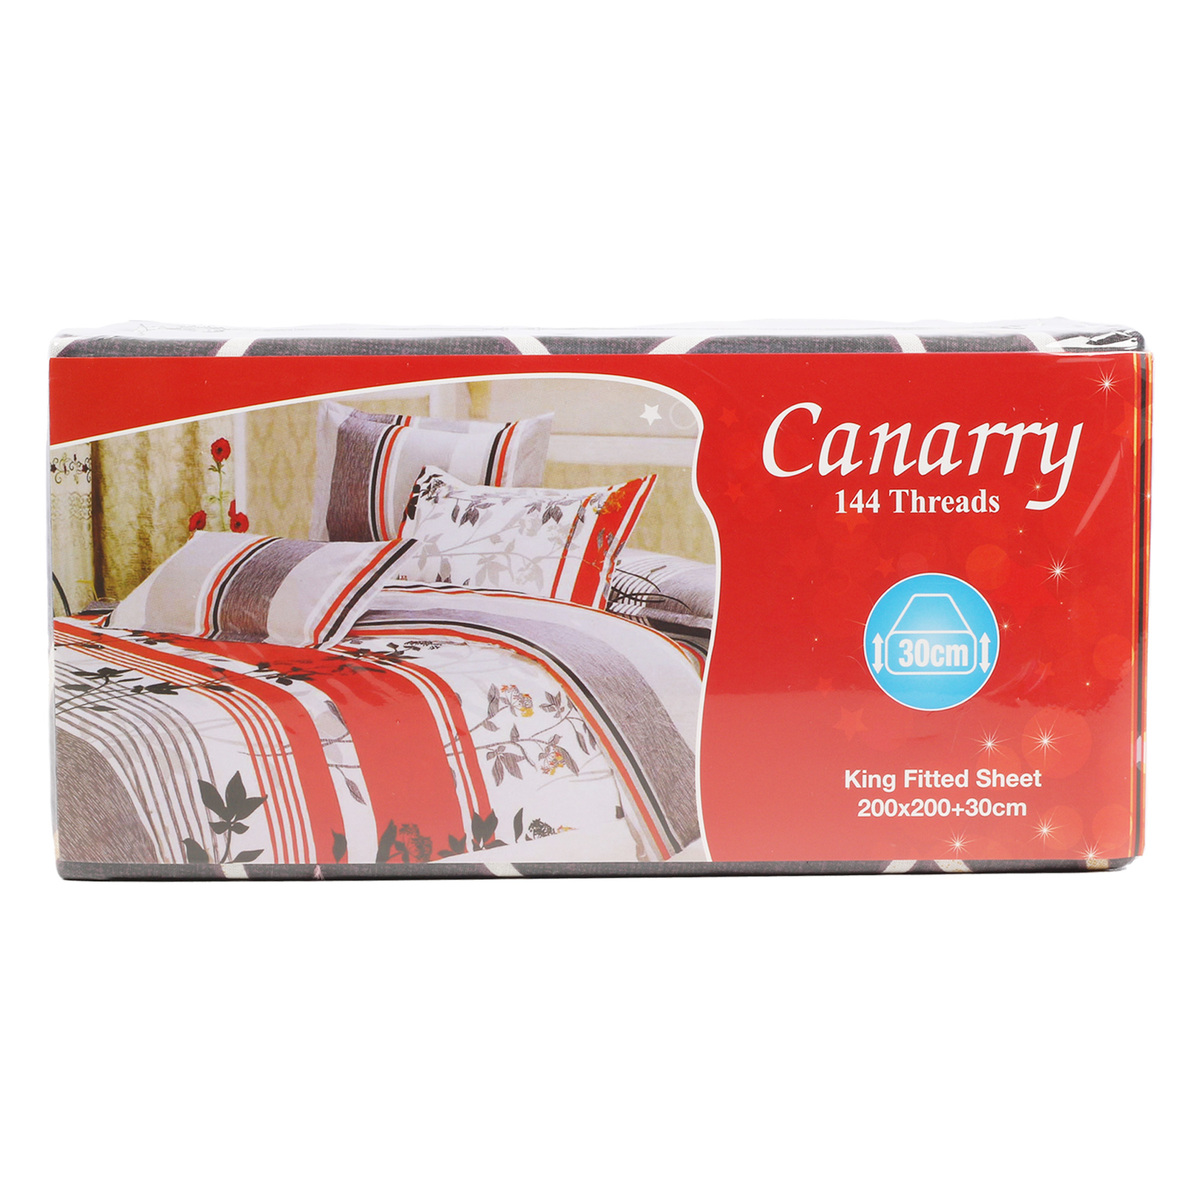 Canarry King Fitted Sheet 200 x 200 + 30cm Assorted